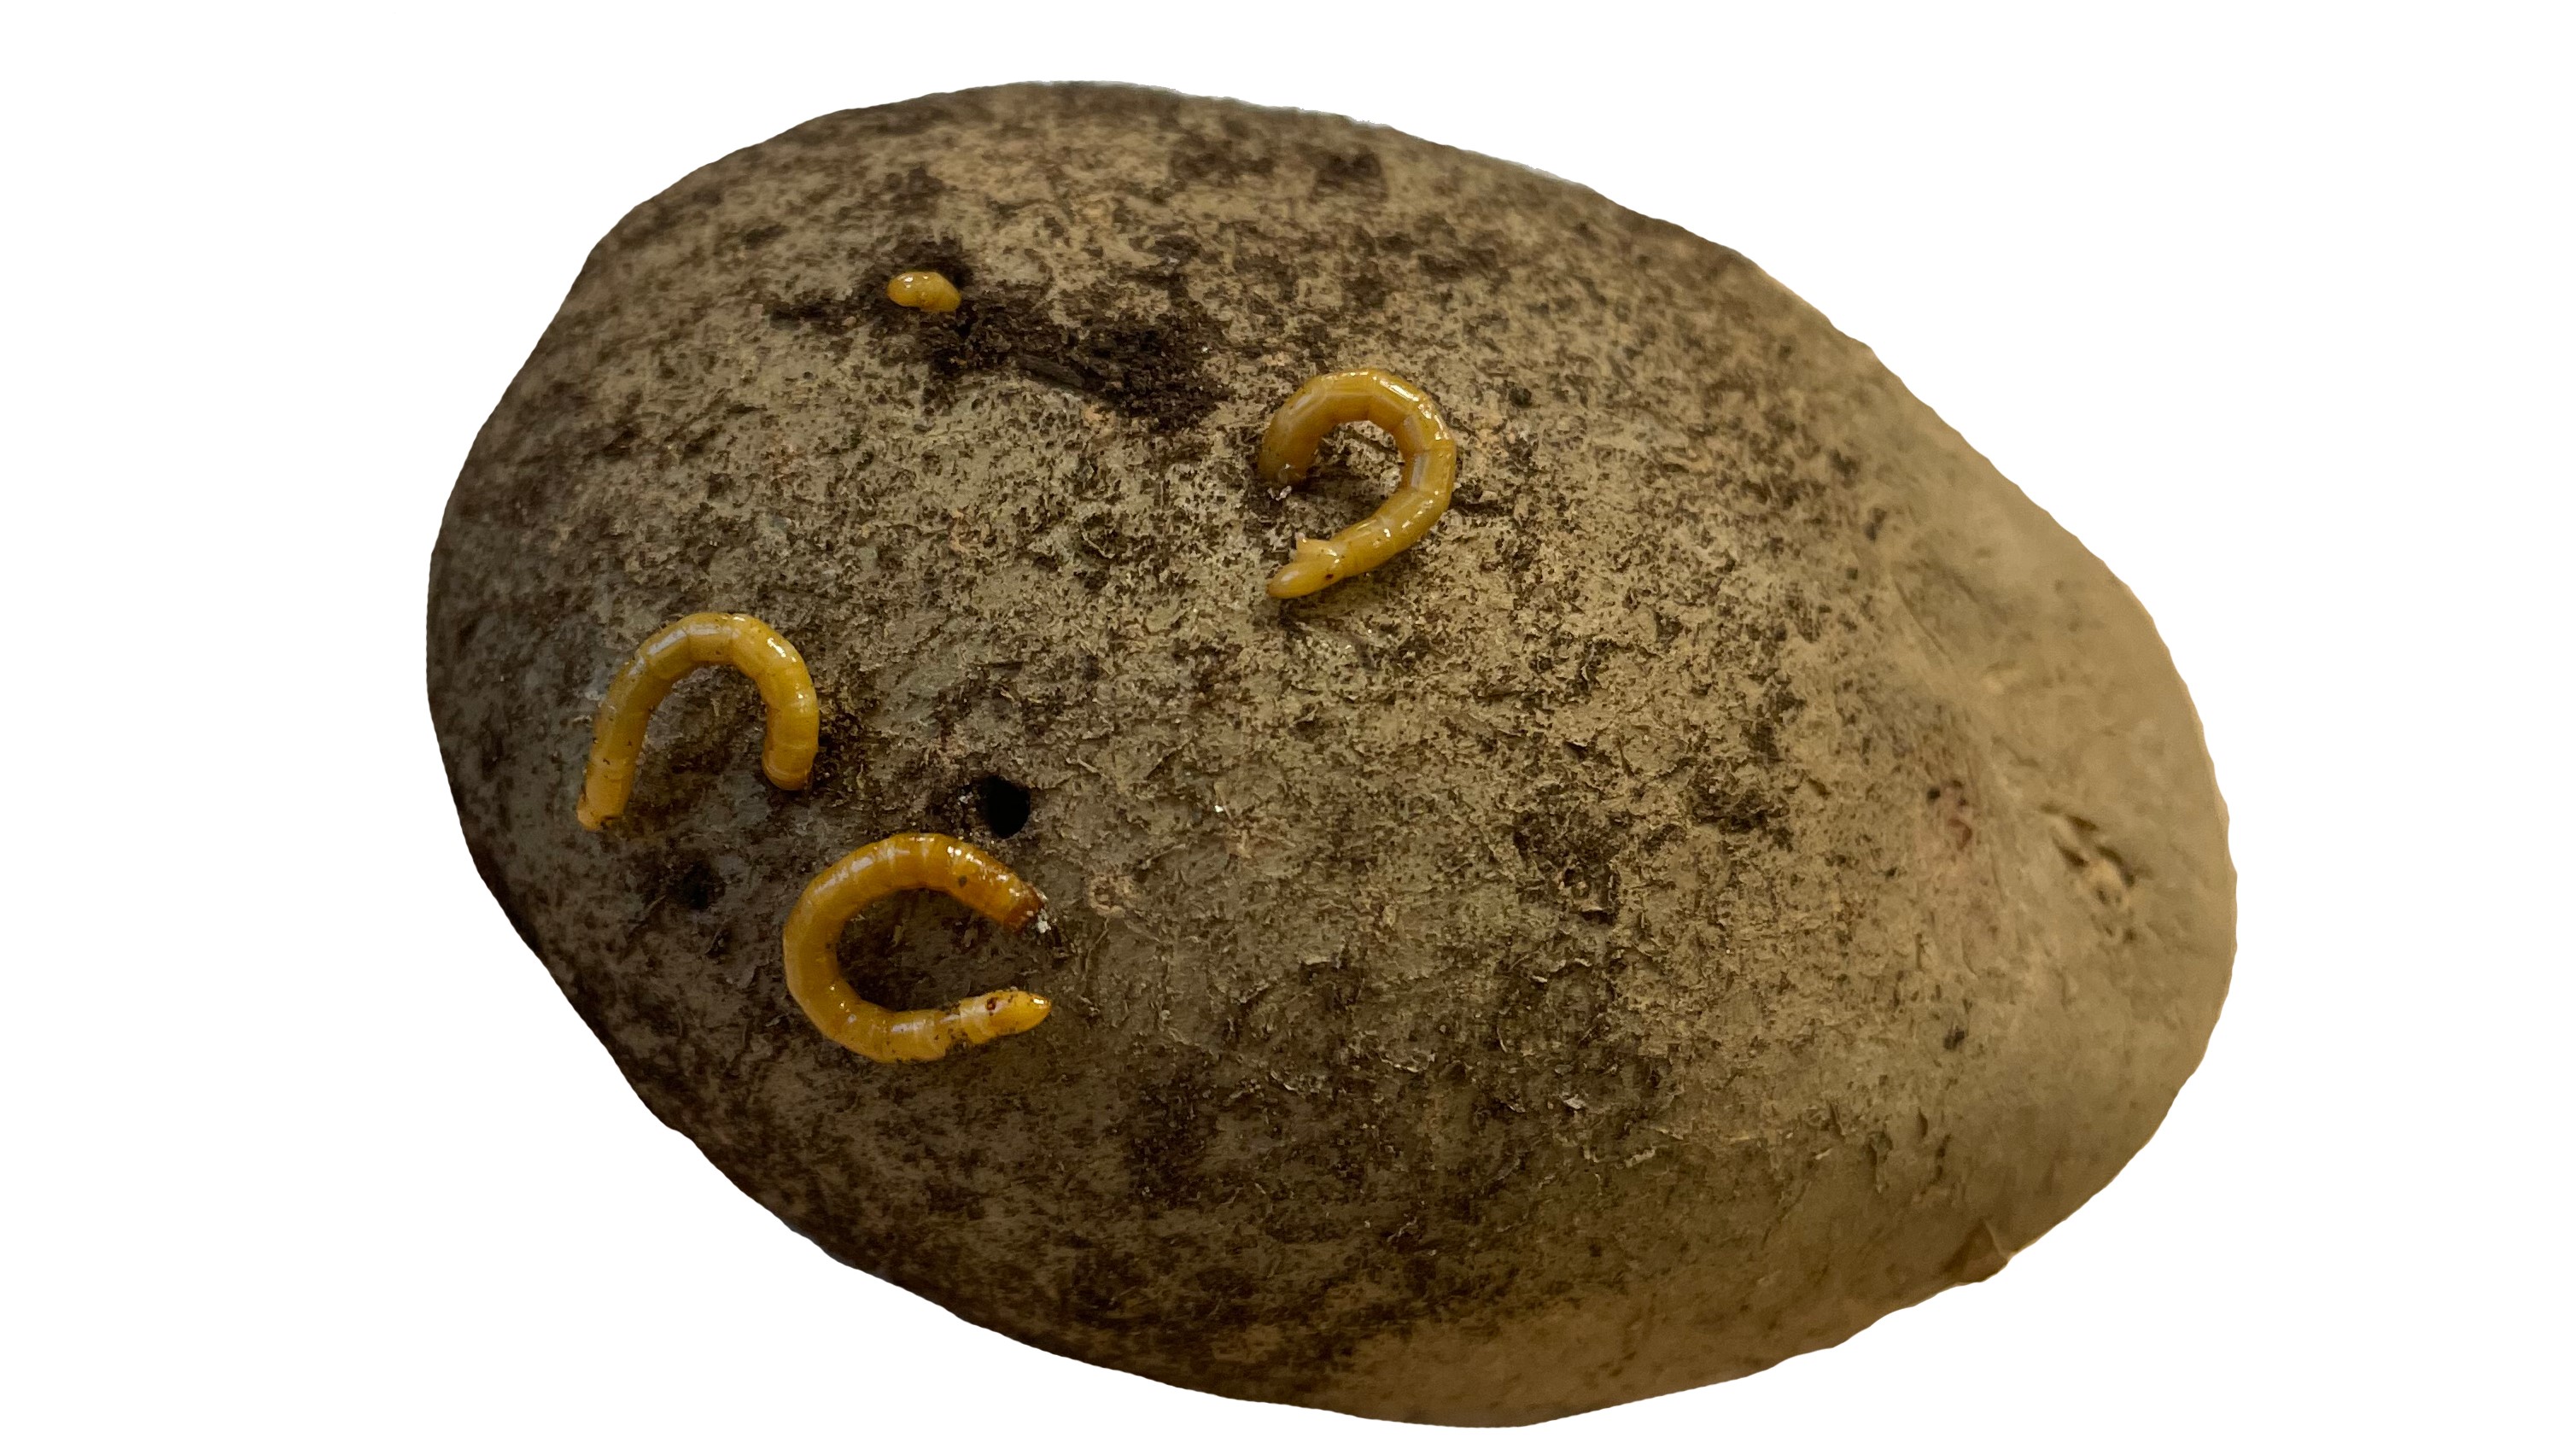 Several wireworm crawling on the surface of a potato and causing damage as they burrow into the flesh